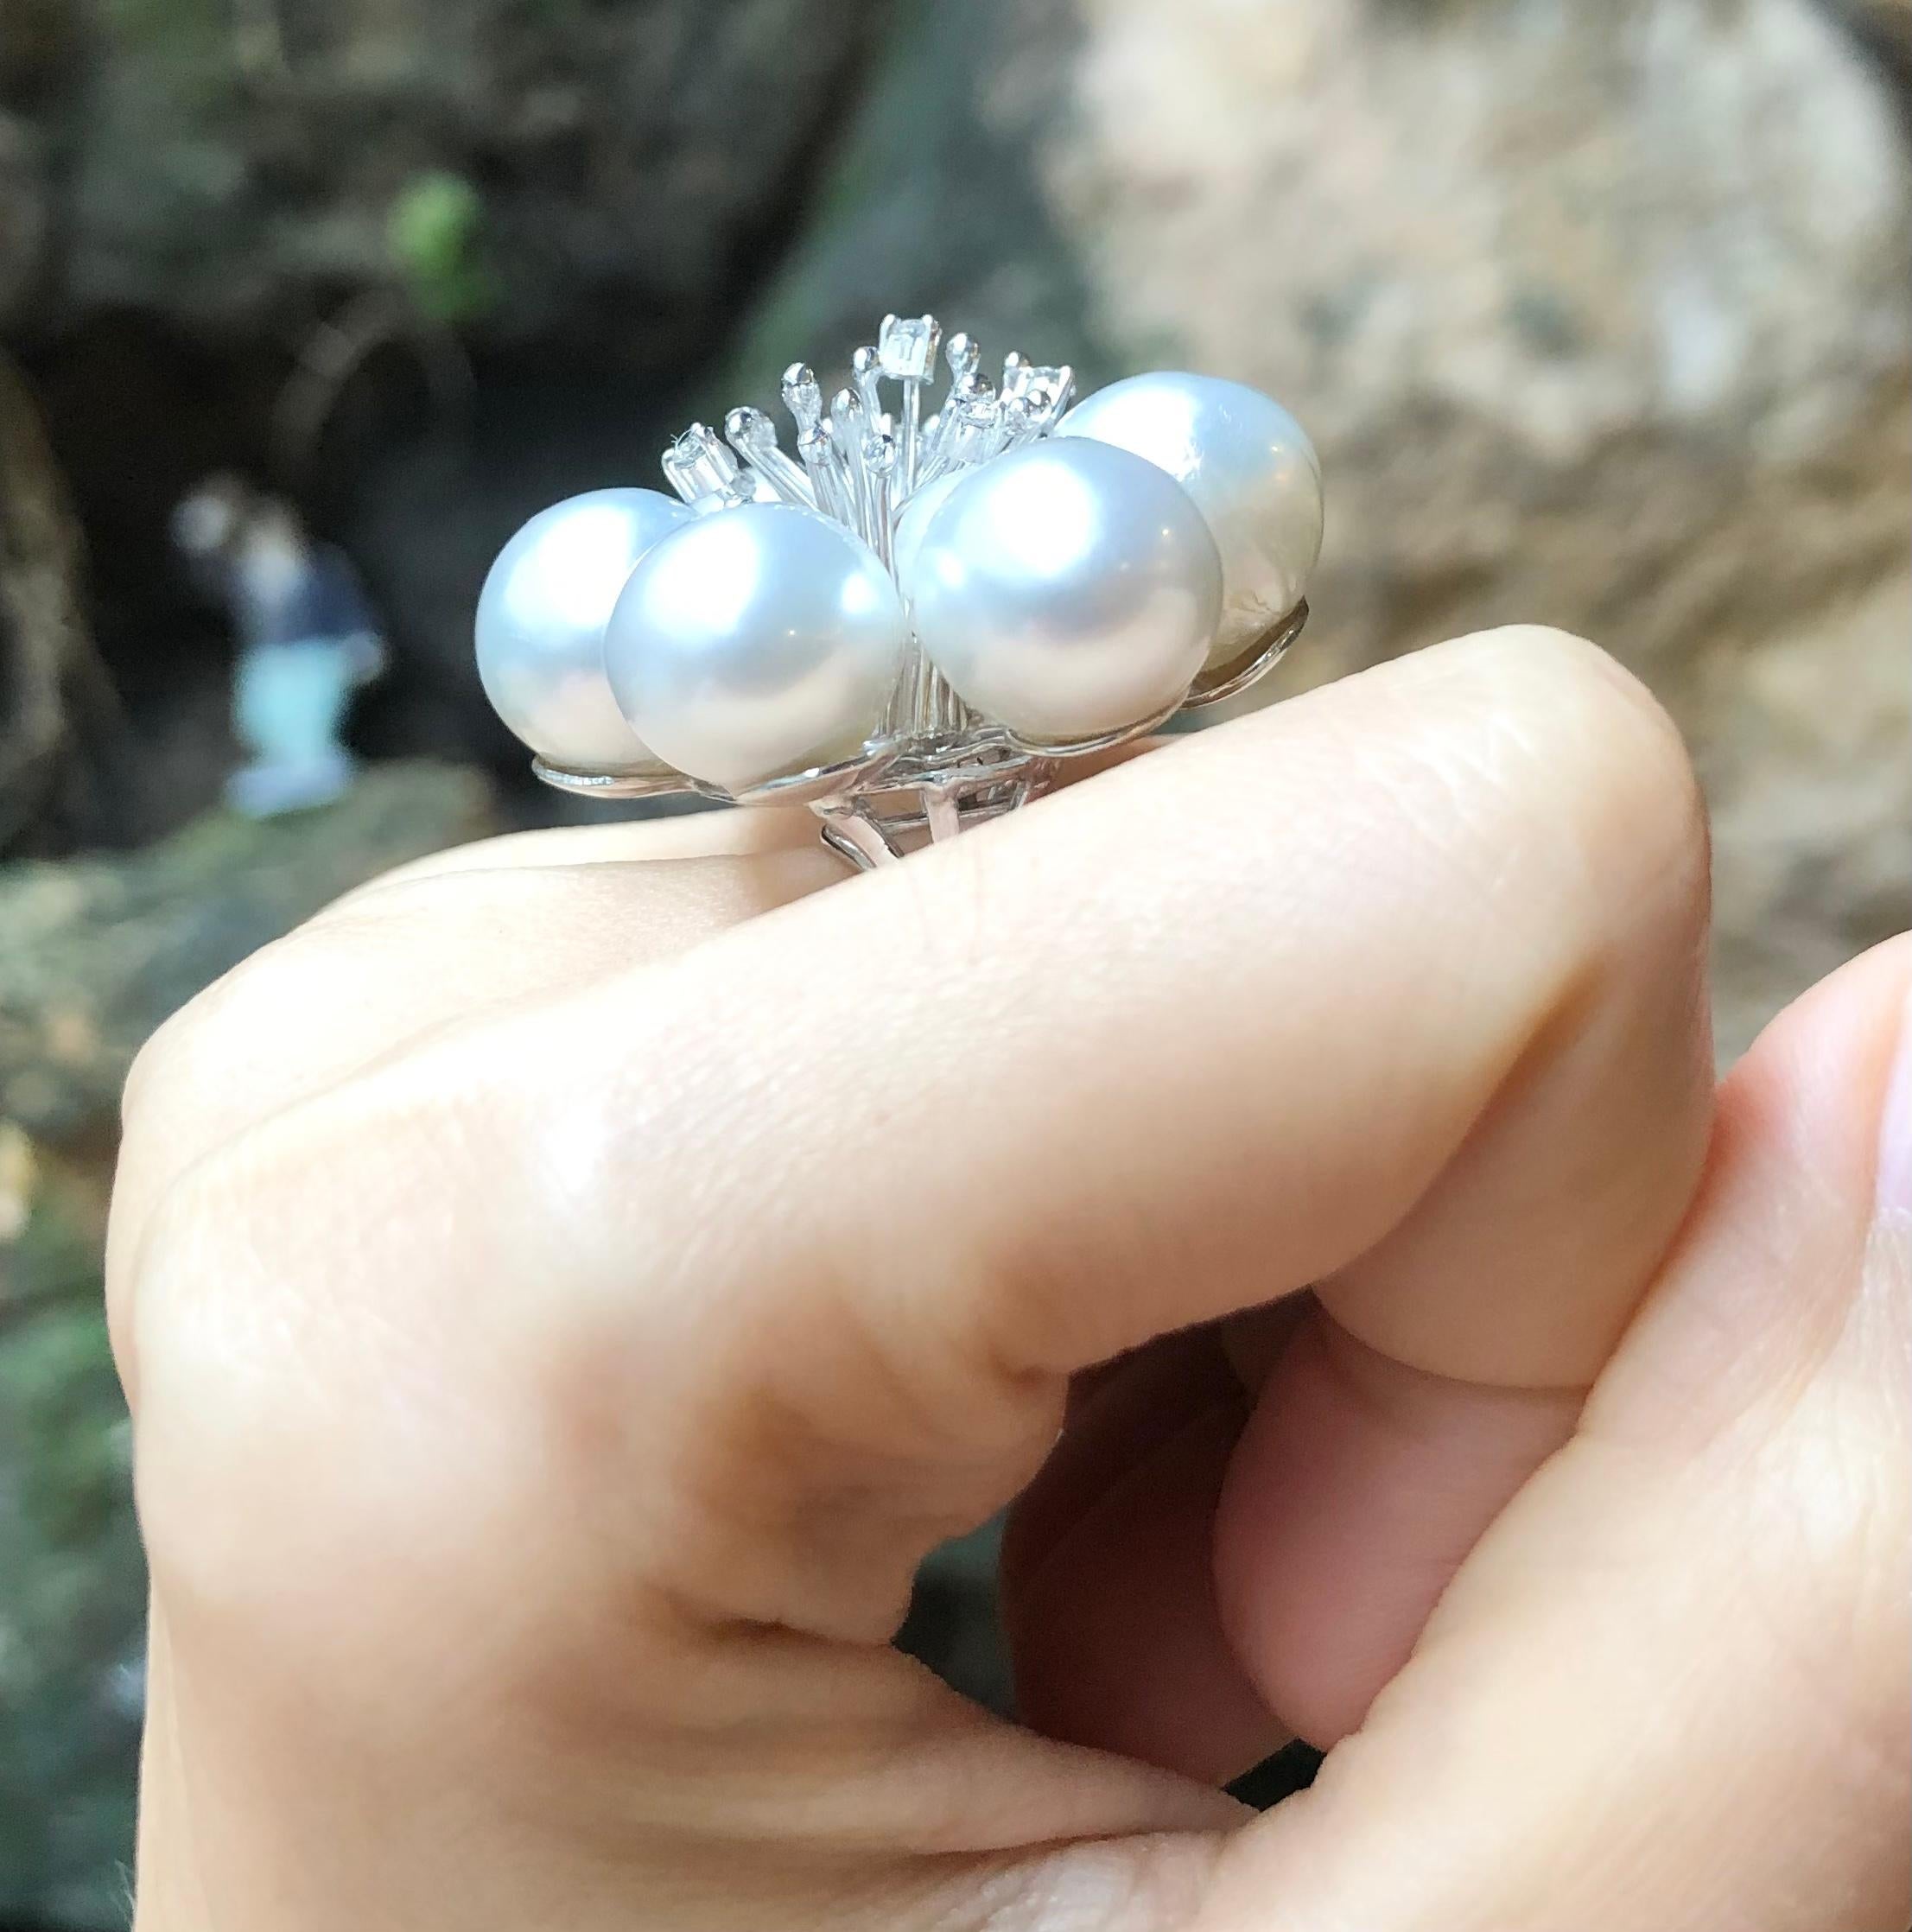 South Sea Pearl with Diamond Ring Set in 18 Karat White Gold Settings For Sale 2